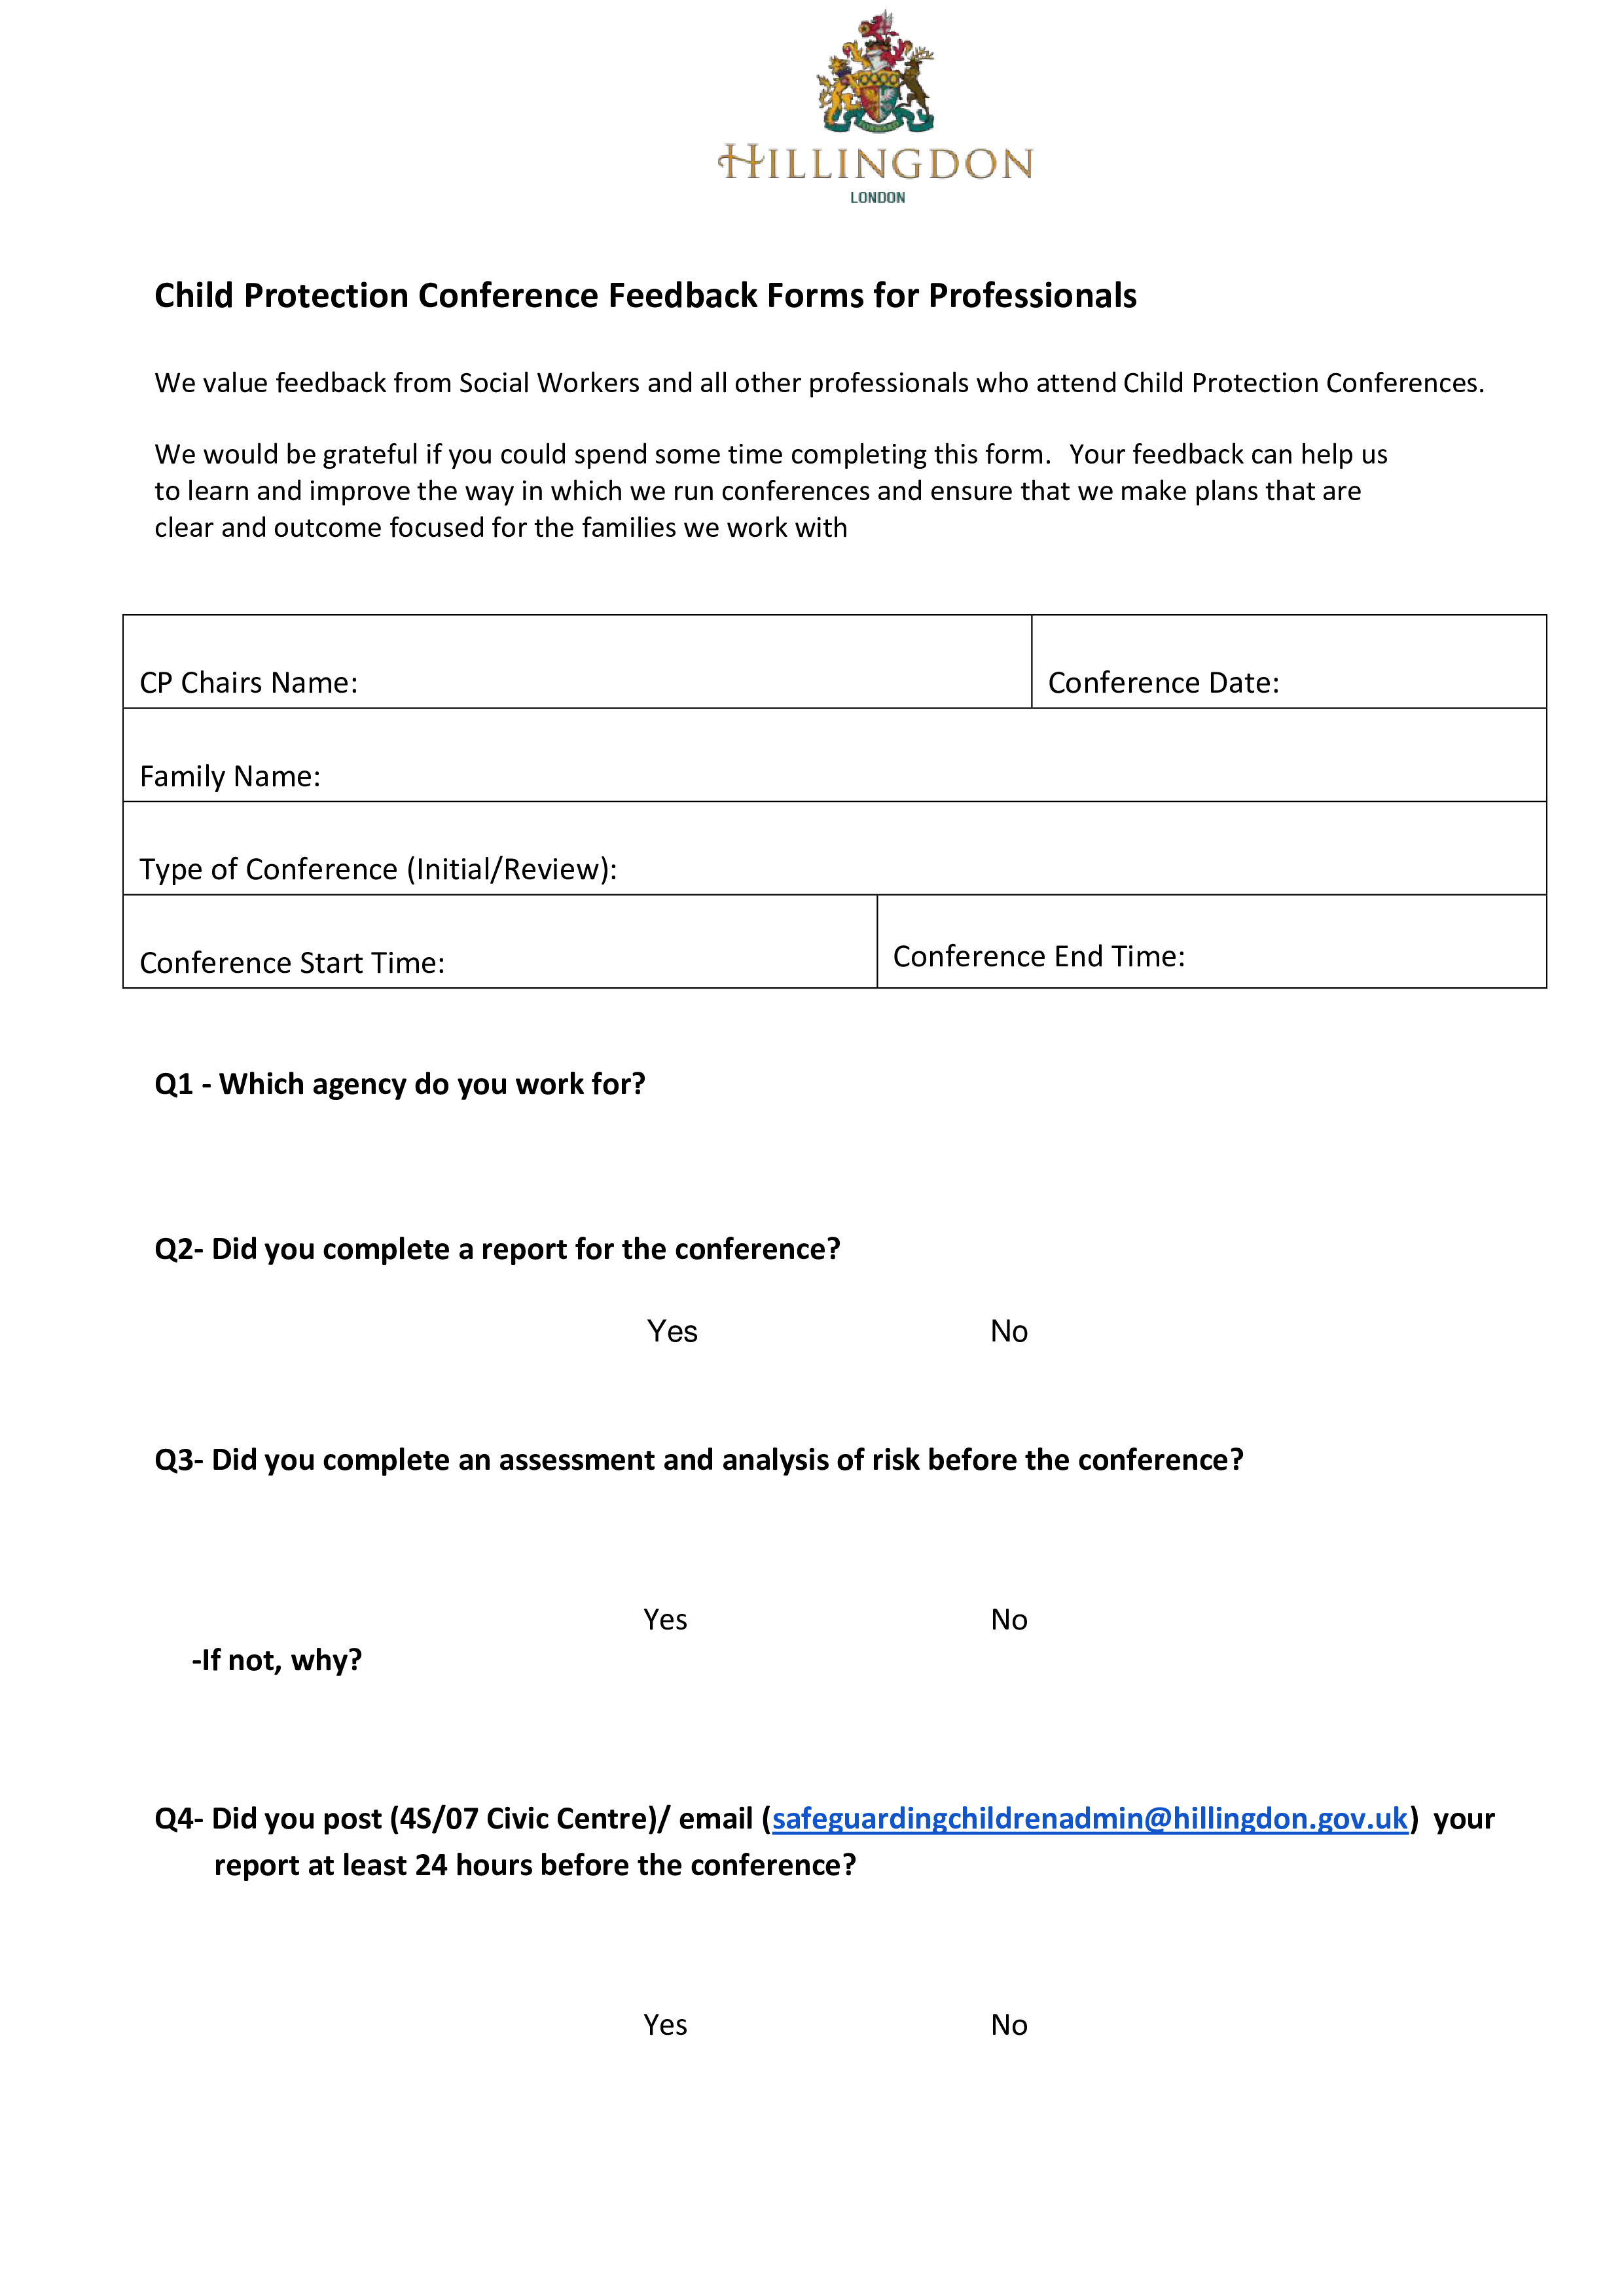 child conference forms for professionals template